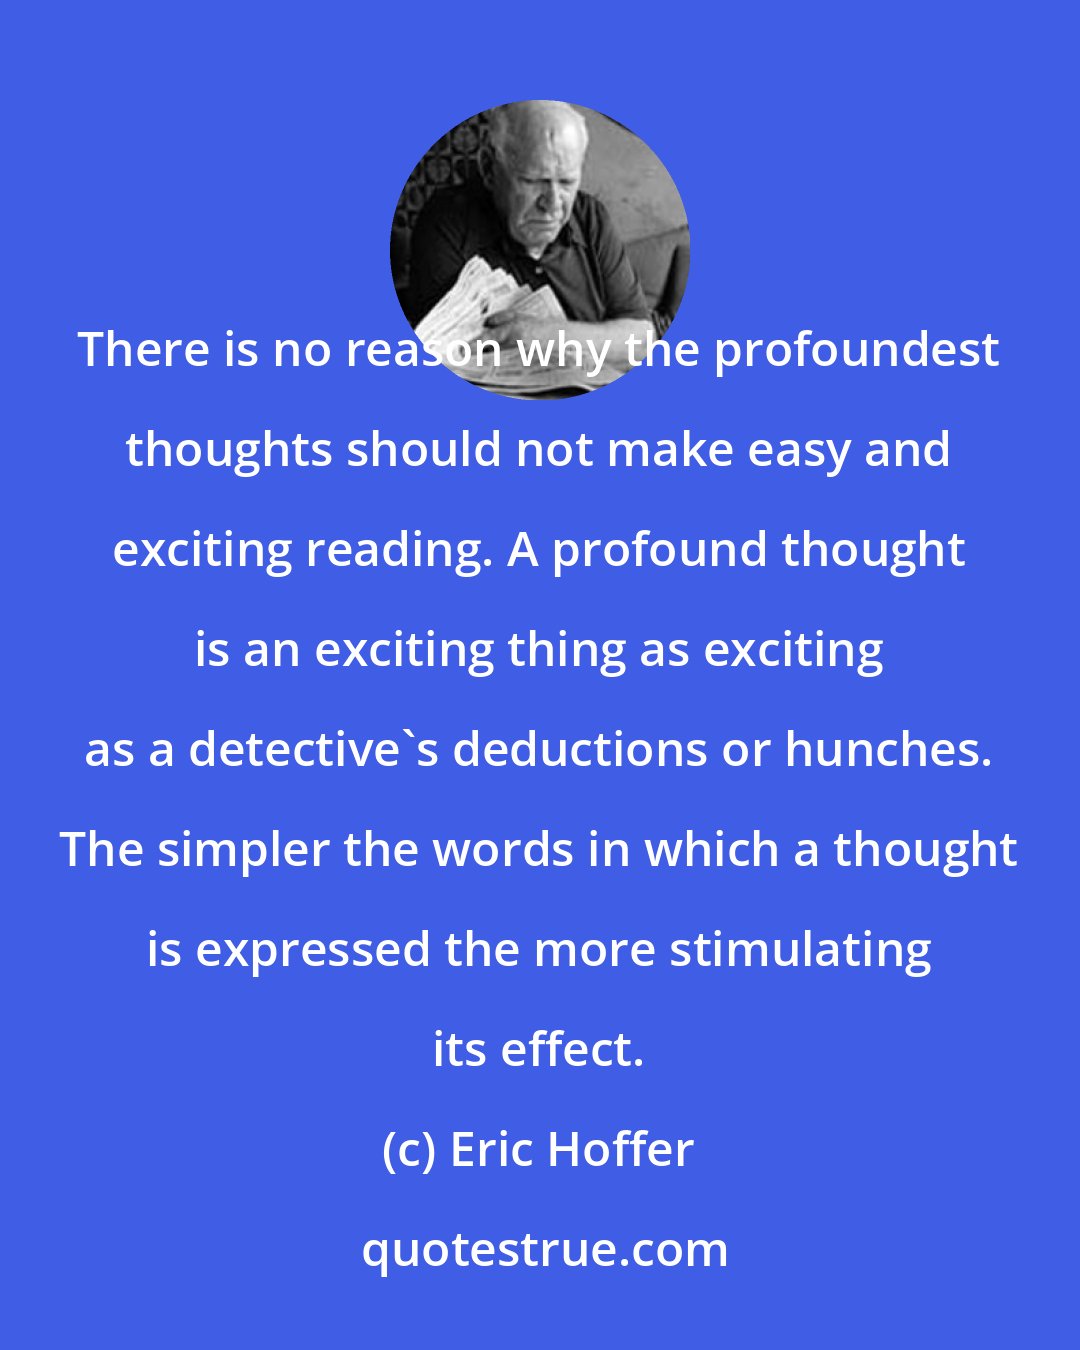 Eric Hoffer: There is no reason why the profoundest thoughts should not make easy and exciting reading. A profound thought is an exciting thing as exciting as a detective's deductions or hunches. The simpler the words in which a thought is expressed the more stimulating its effect.